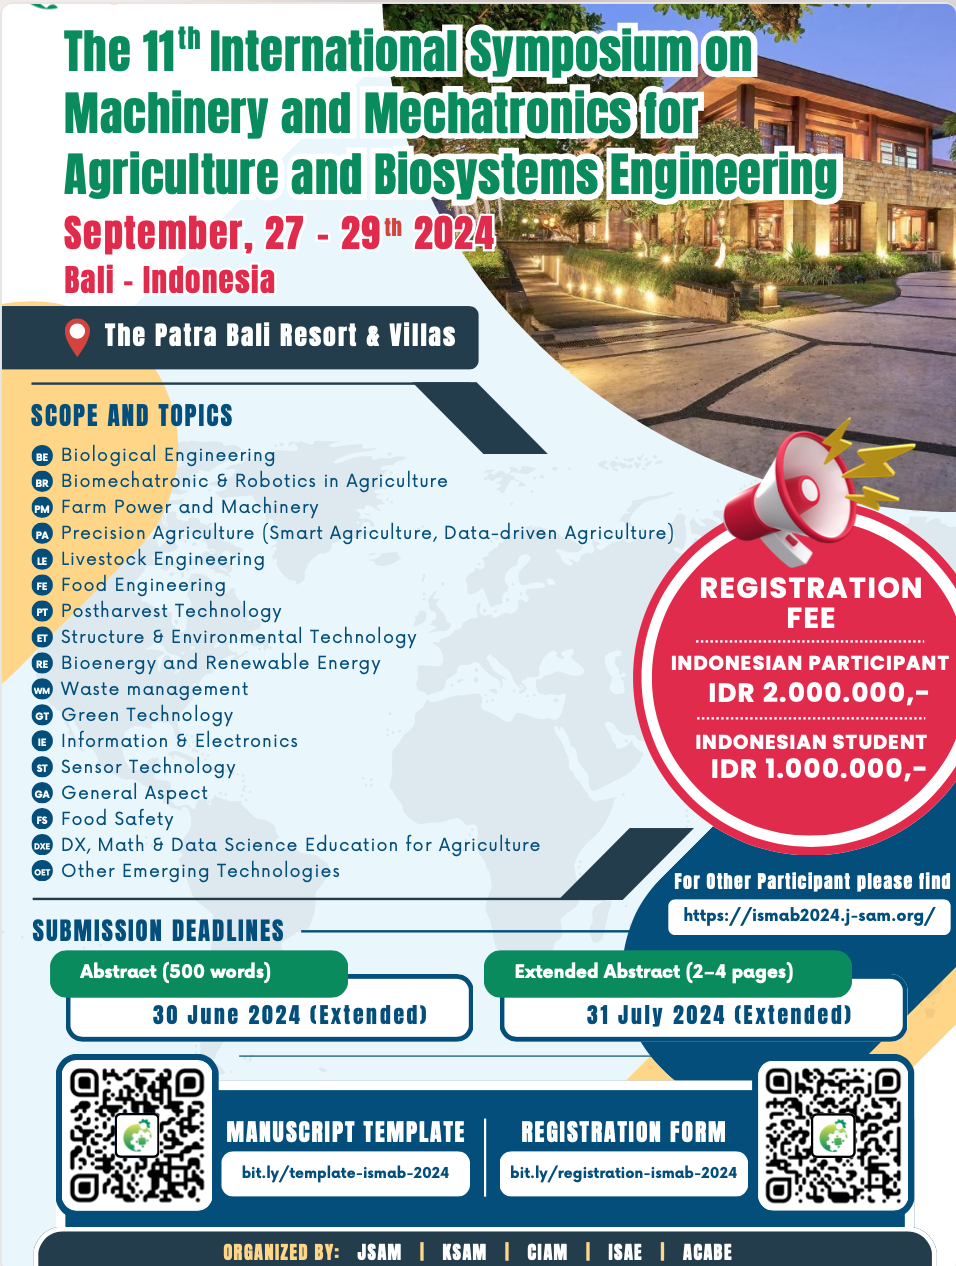 The 11th International Symposium on Machinery and Mechatronics for Agricultural and Biosystems Engineering